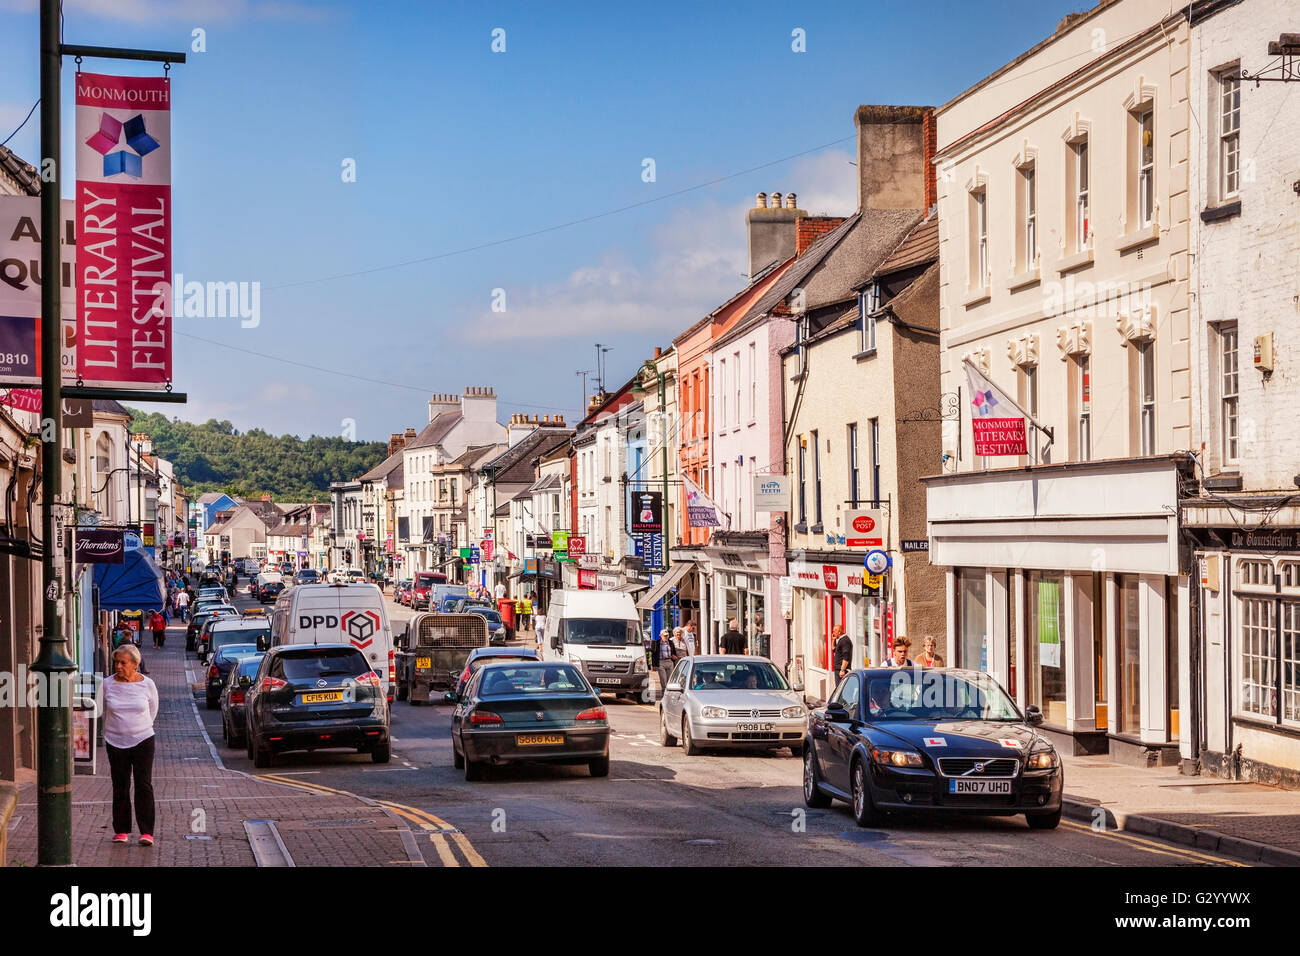 Monnow Street, the main shopping street in Monmouth, with a banner advertising the Literary Festival,  Monmouthshire, Wales, UK Stock Photo